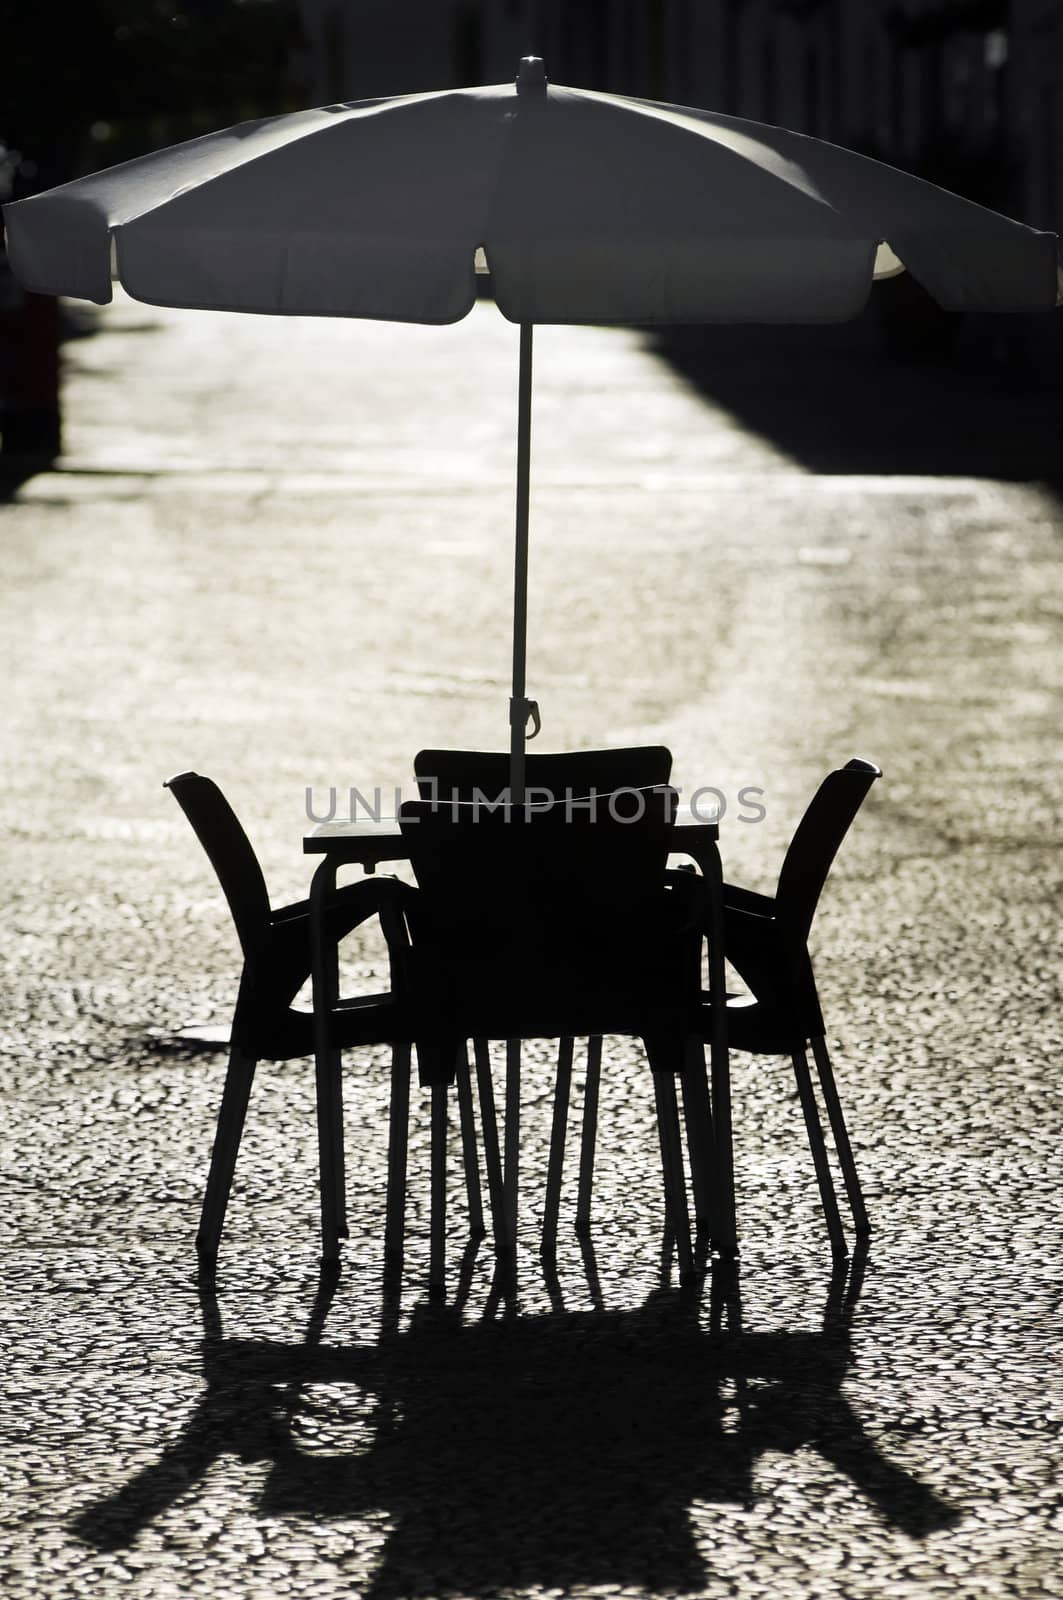 A little empty coffee table with four chairs around and umbrella in the middle standing on the pavement of a sidewalk outdoors in atmospheric light. 